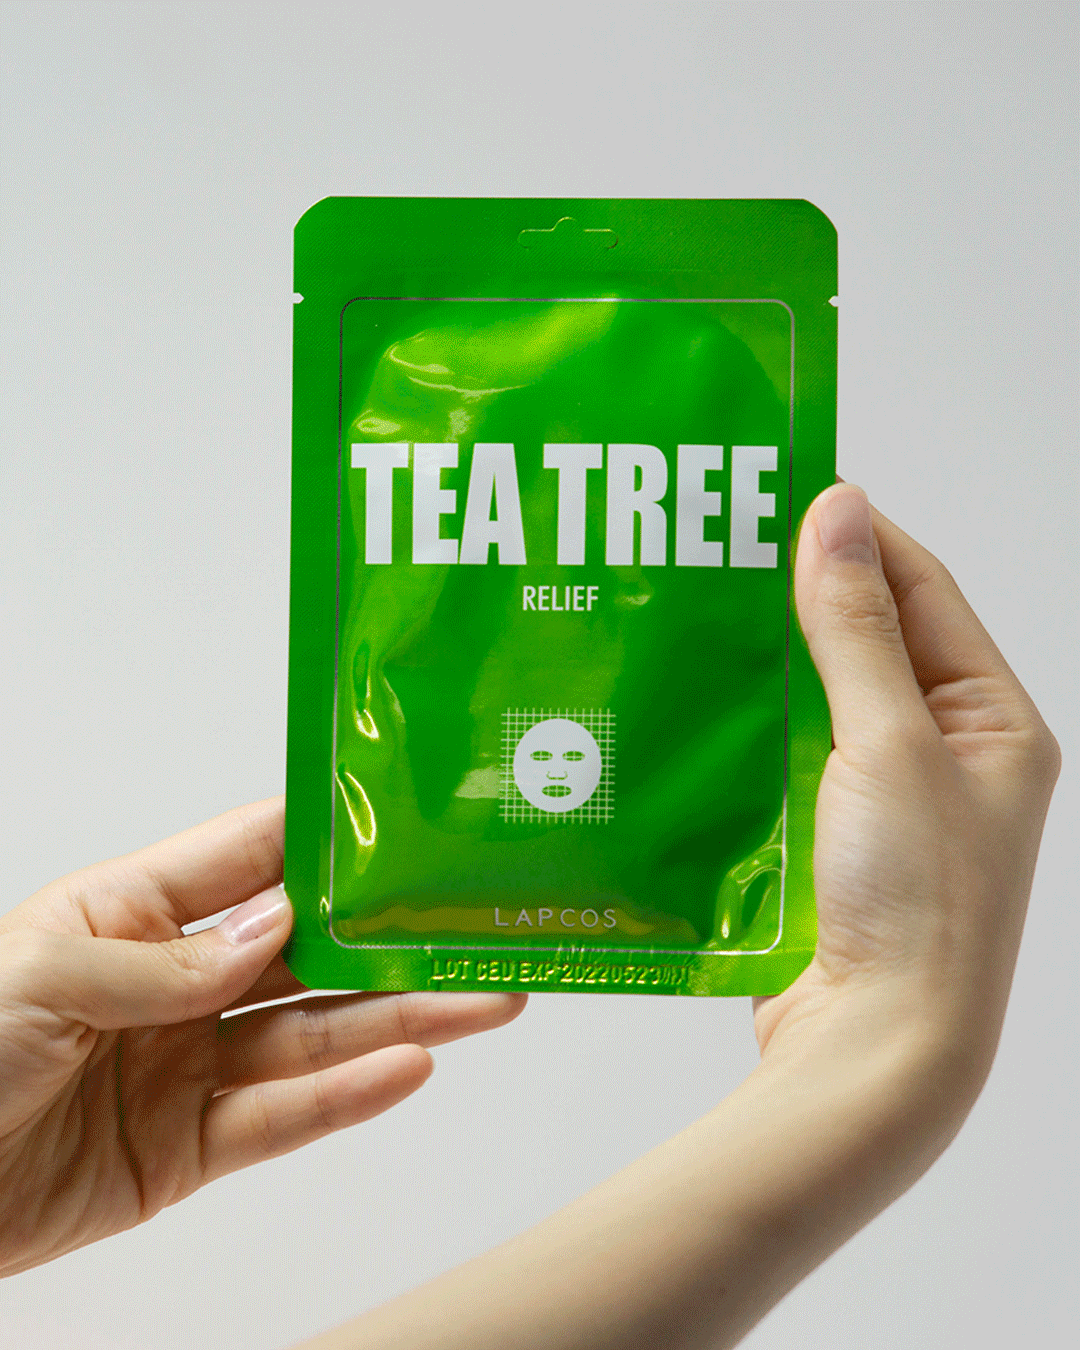 Model opens a Tea Tree Relief mask packet and unfolds the mask inside